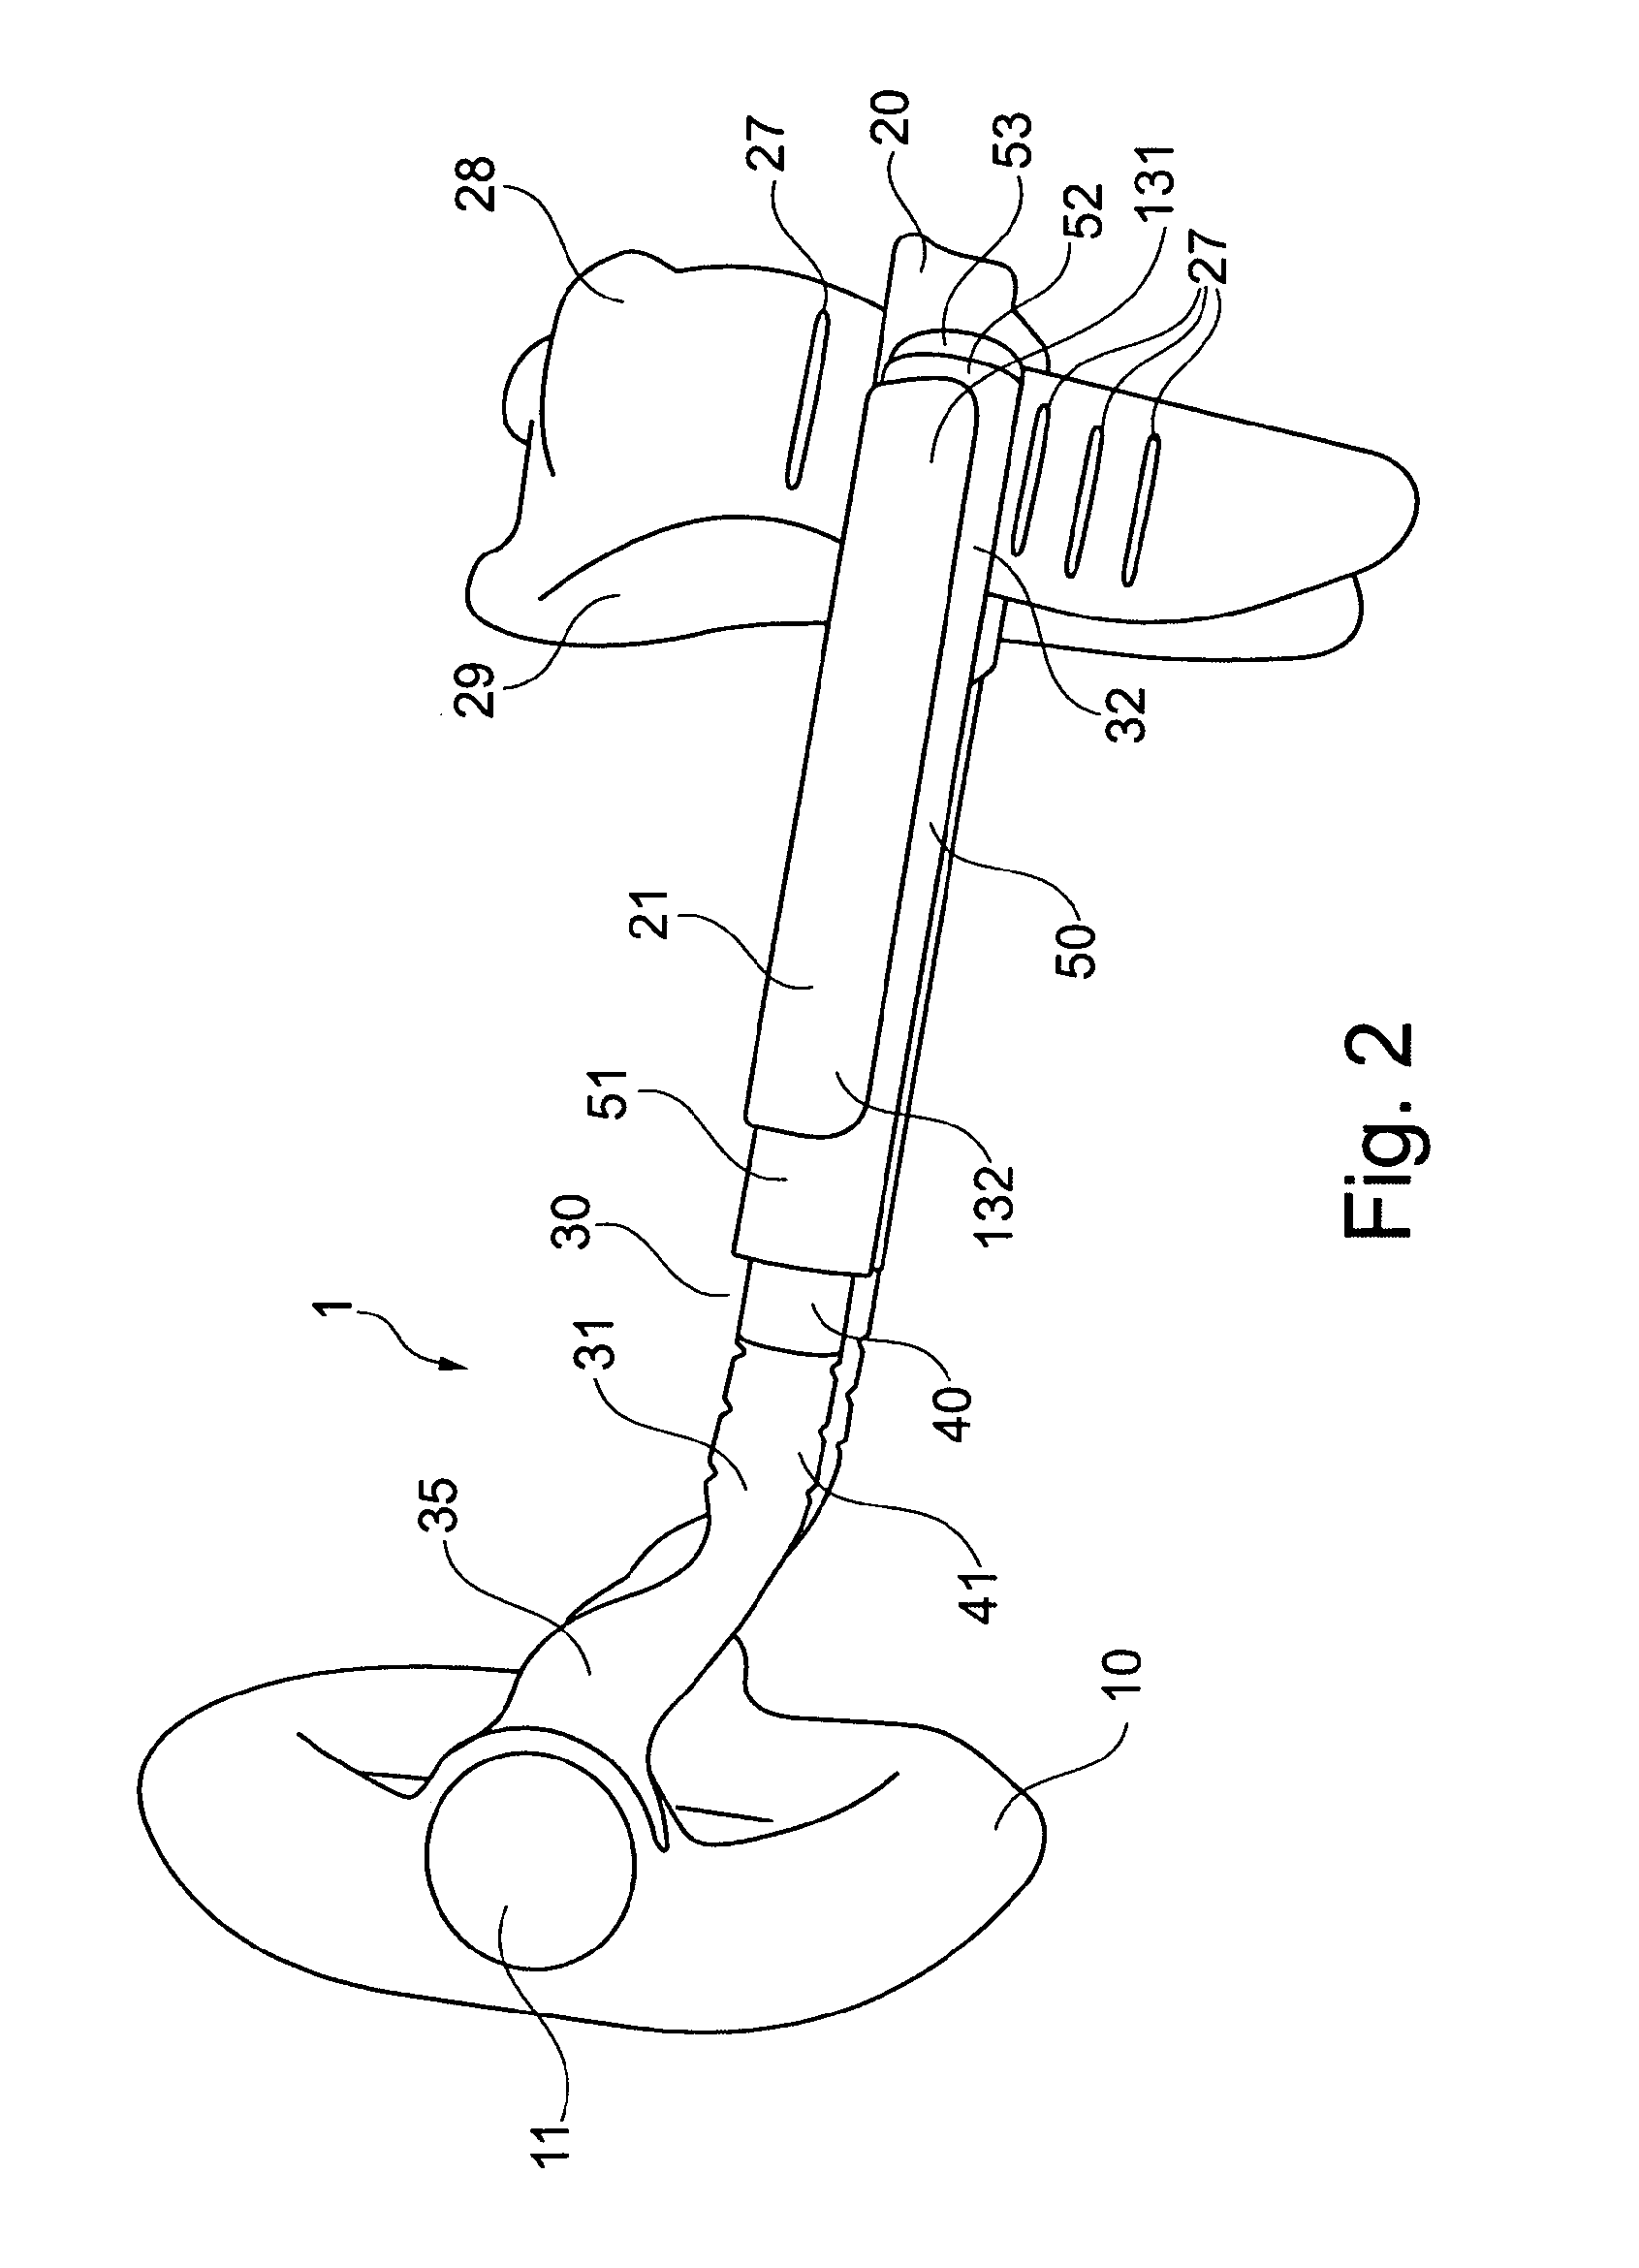 Apparatus for applying traction to a penis